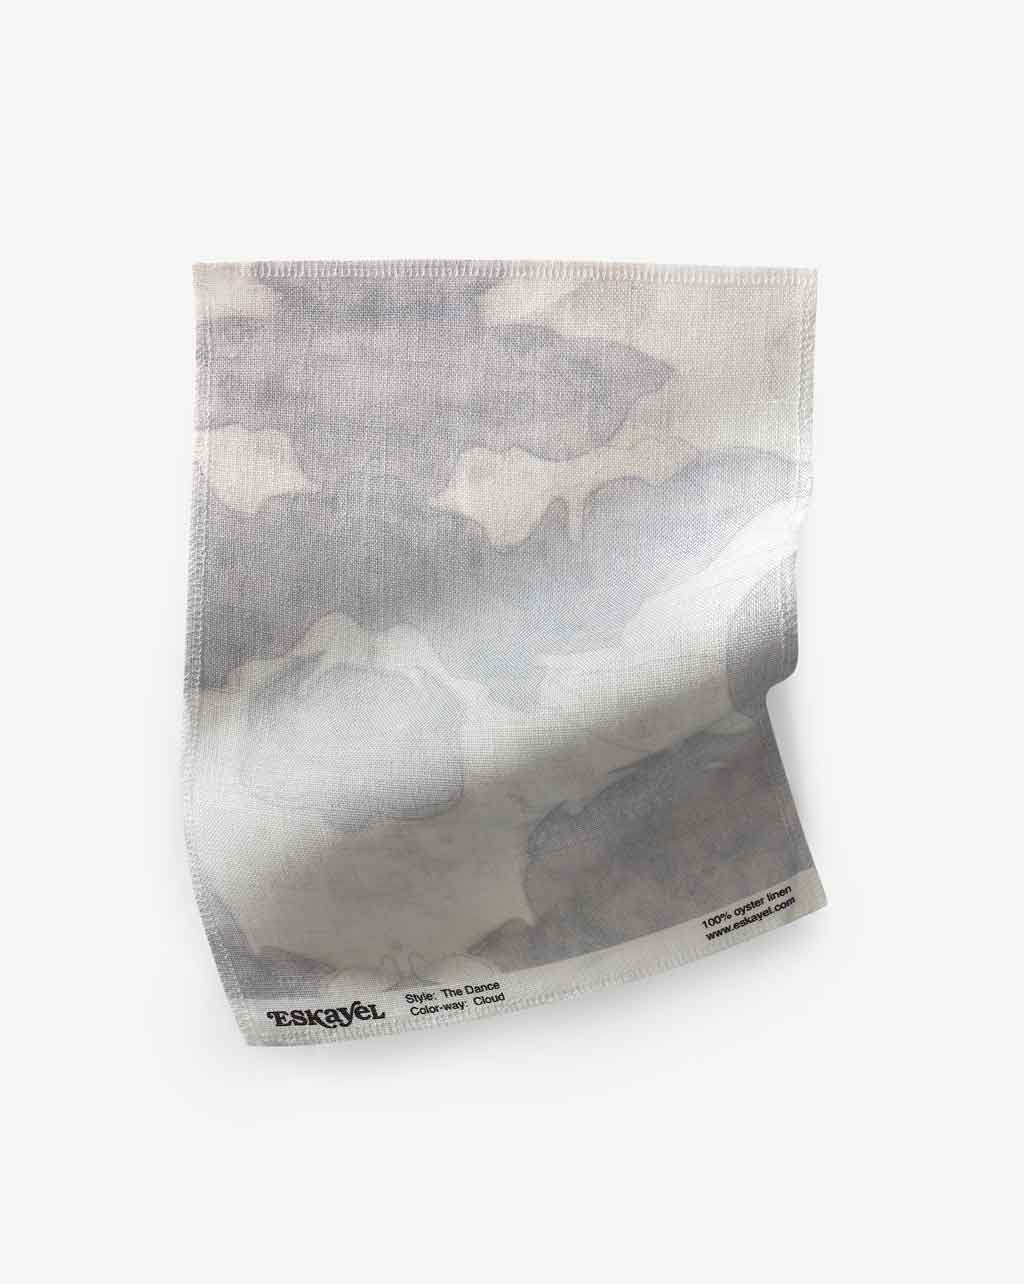 An image of a grey and white fabric on a white surface from The Dance Fabric Cloud Collection